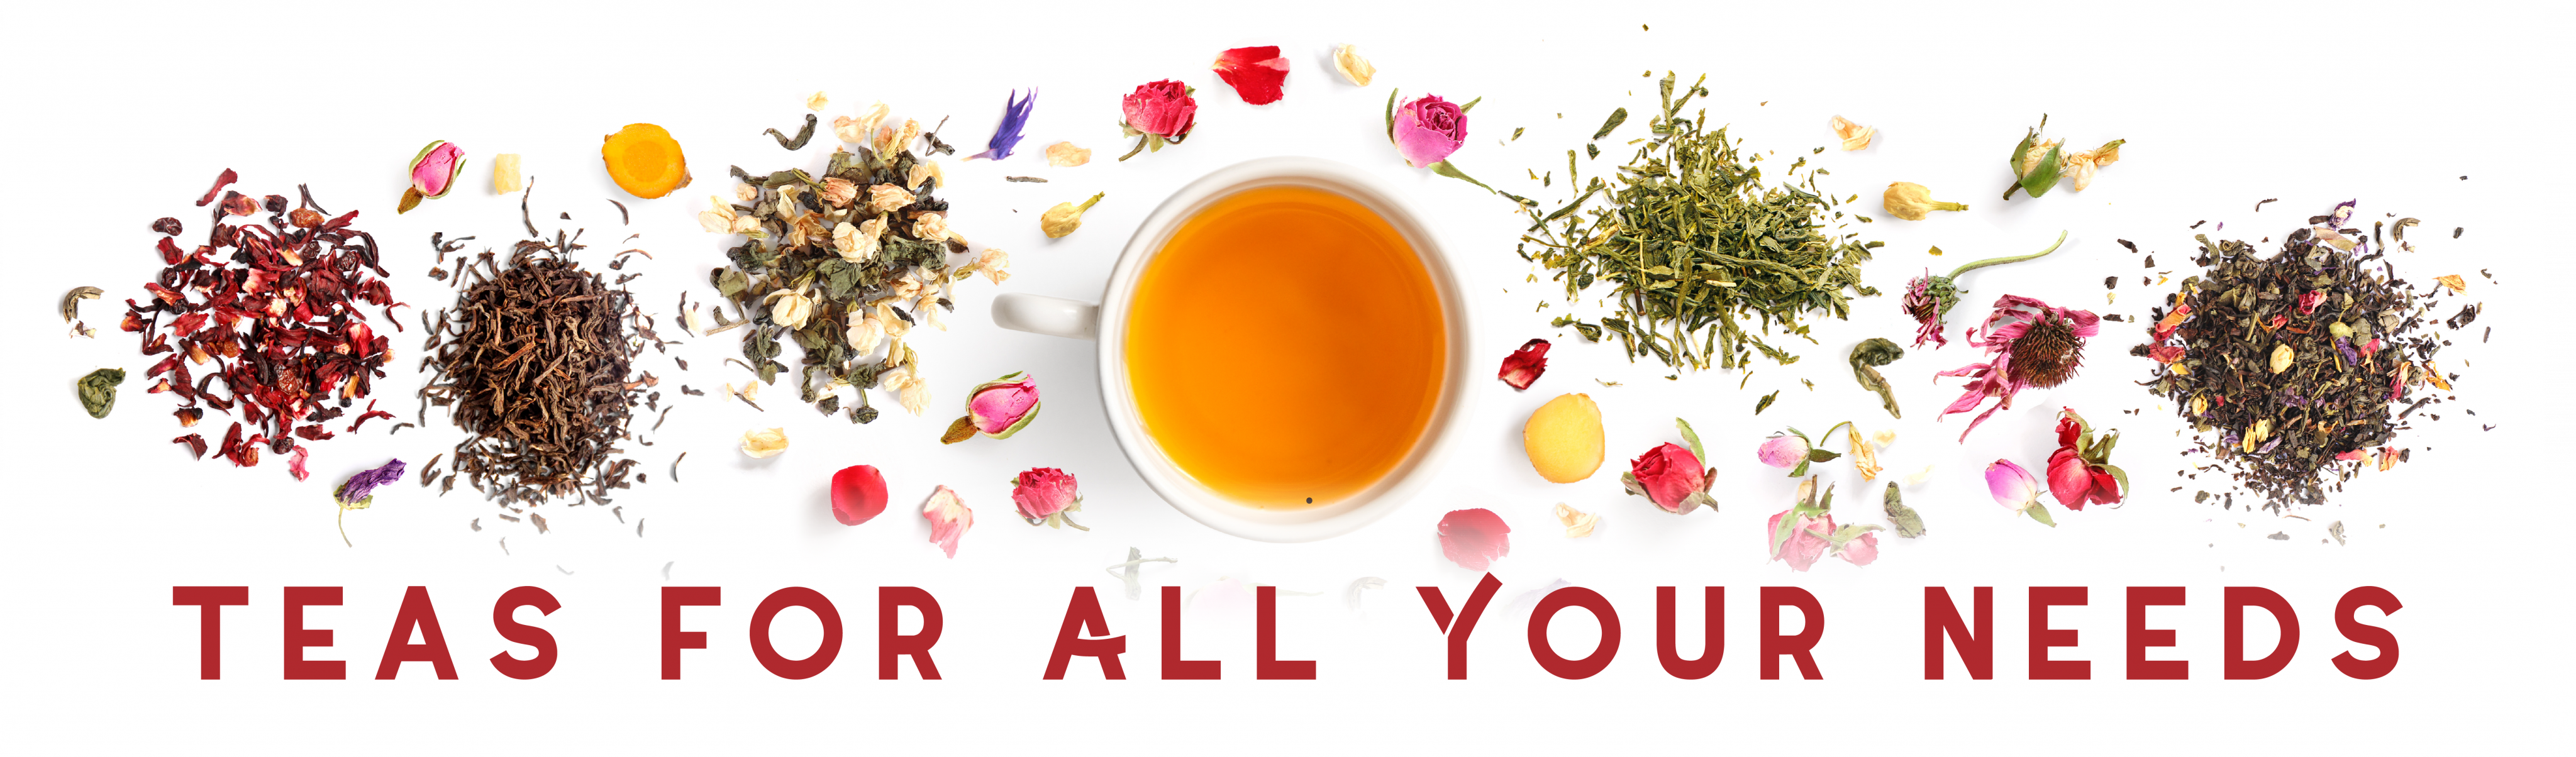 Teas for Your All Needs